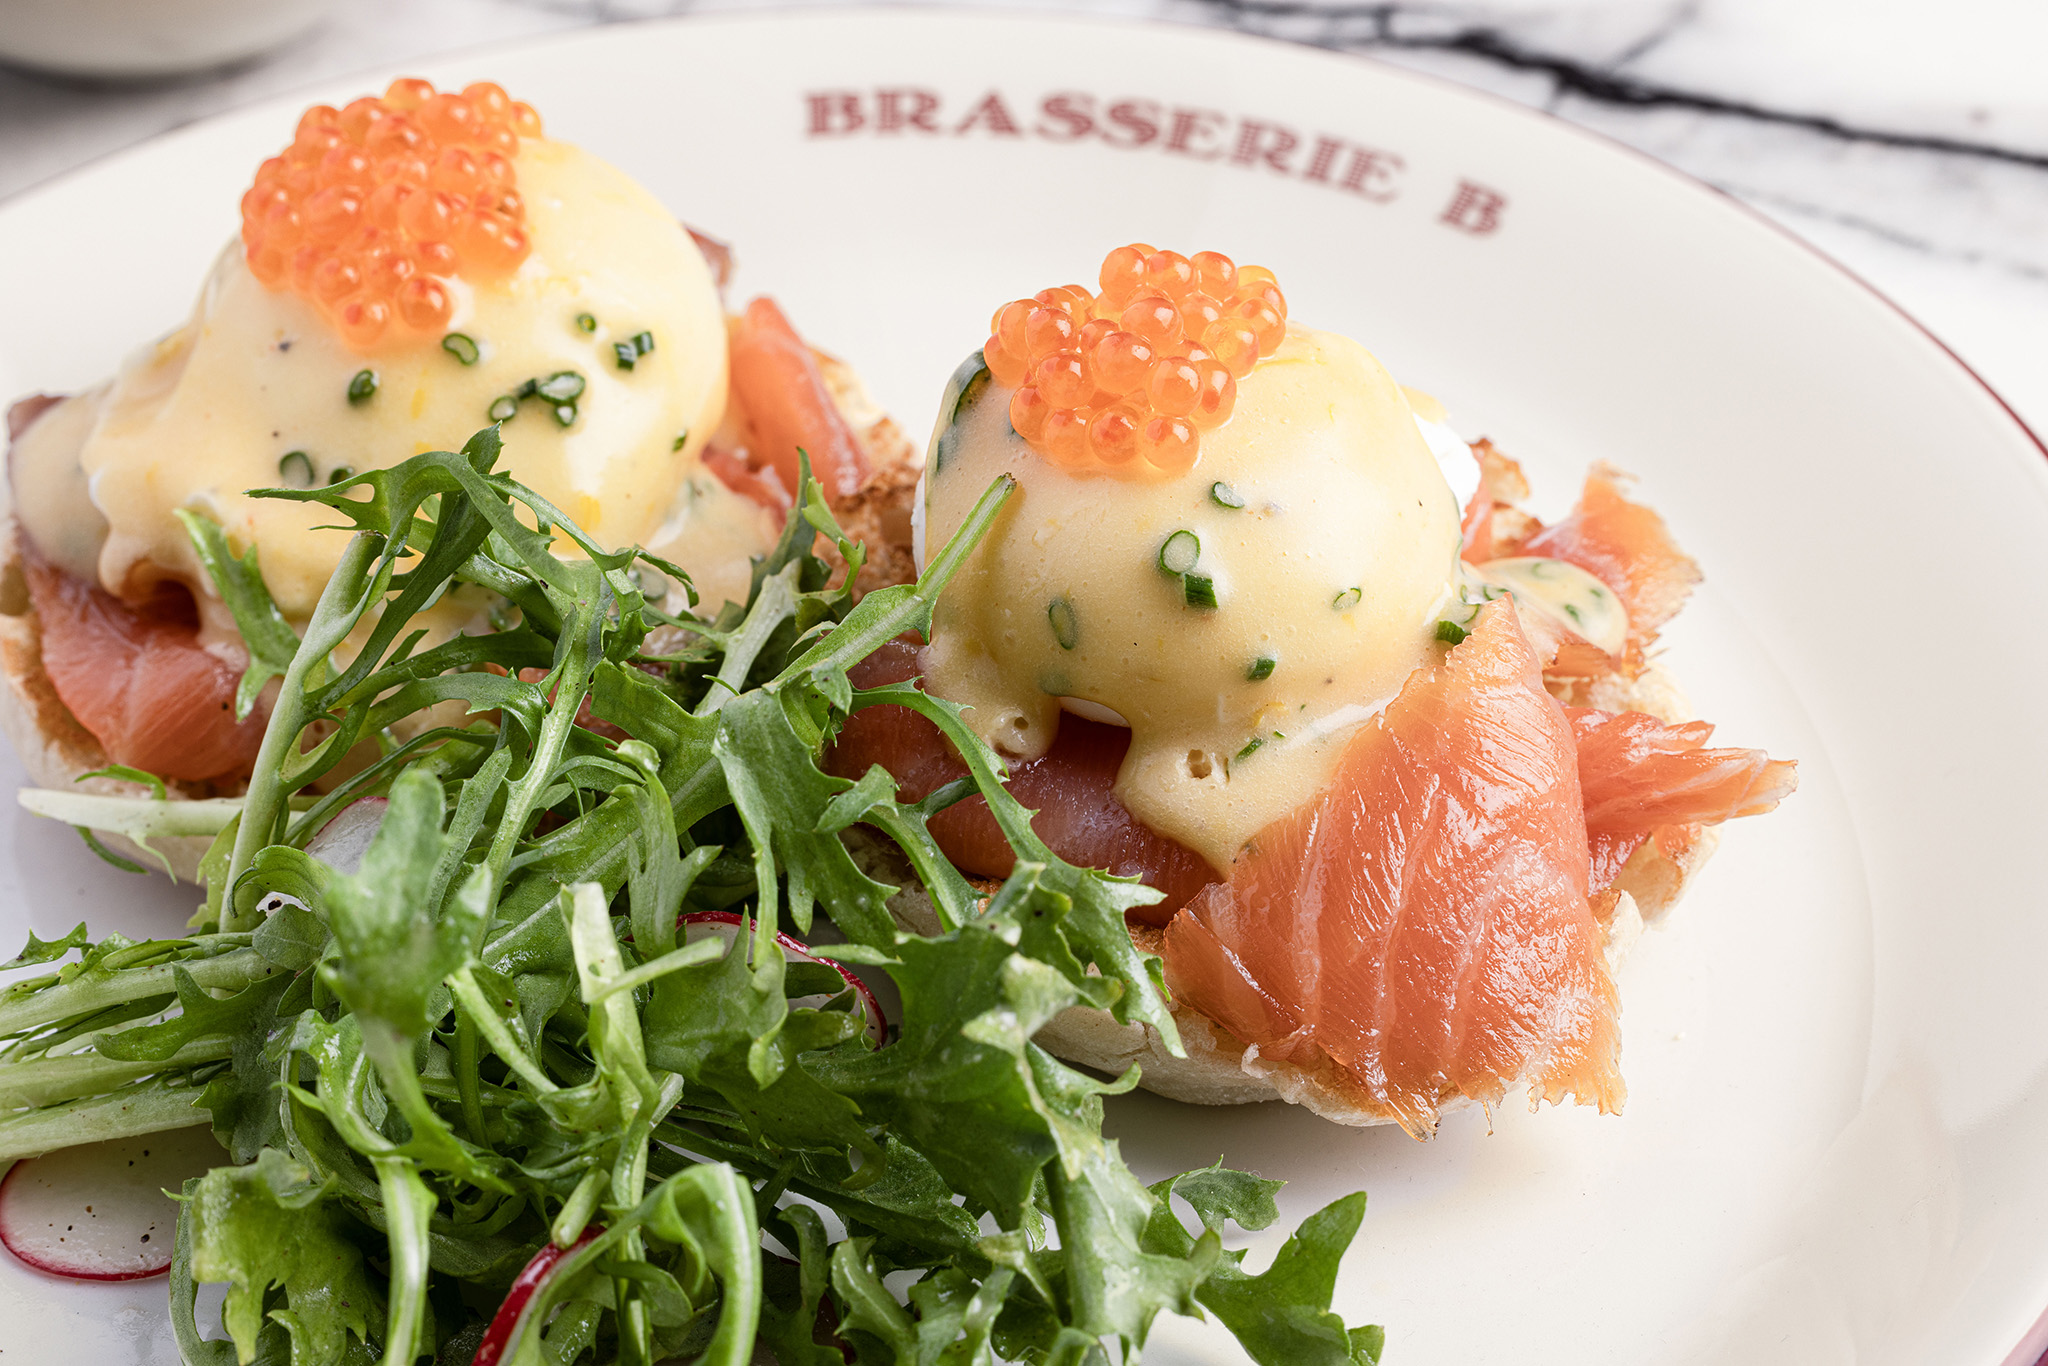 Brasserie B by Bobby Flay at Caesars Palace - Eggs Royale